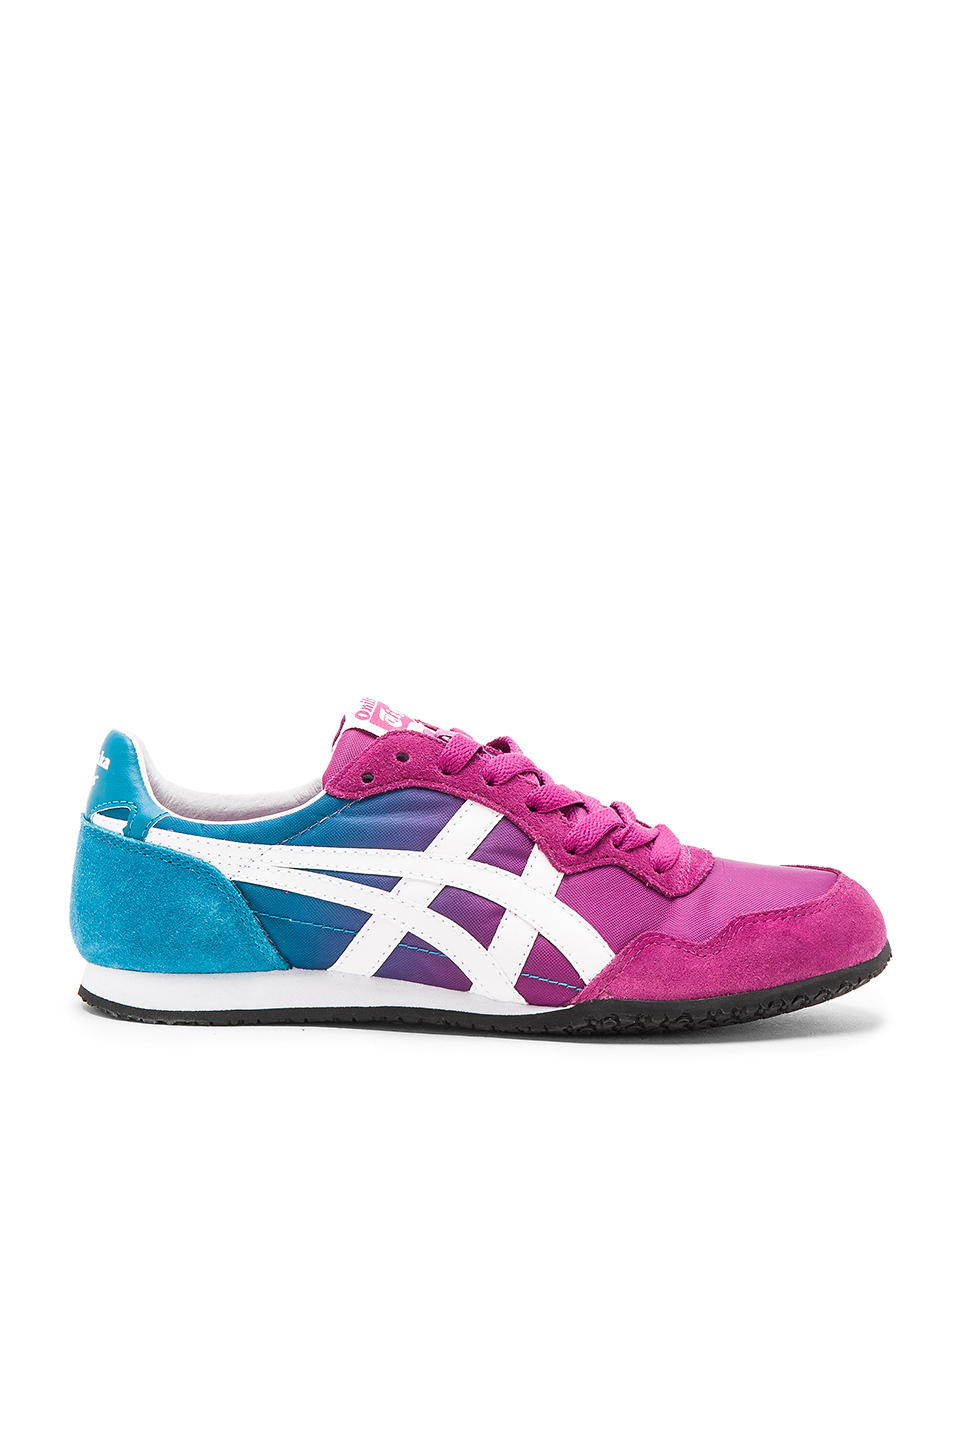 Onitsuka Tiger Leather Serrano Sneaker in Blue | Lyst